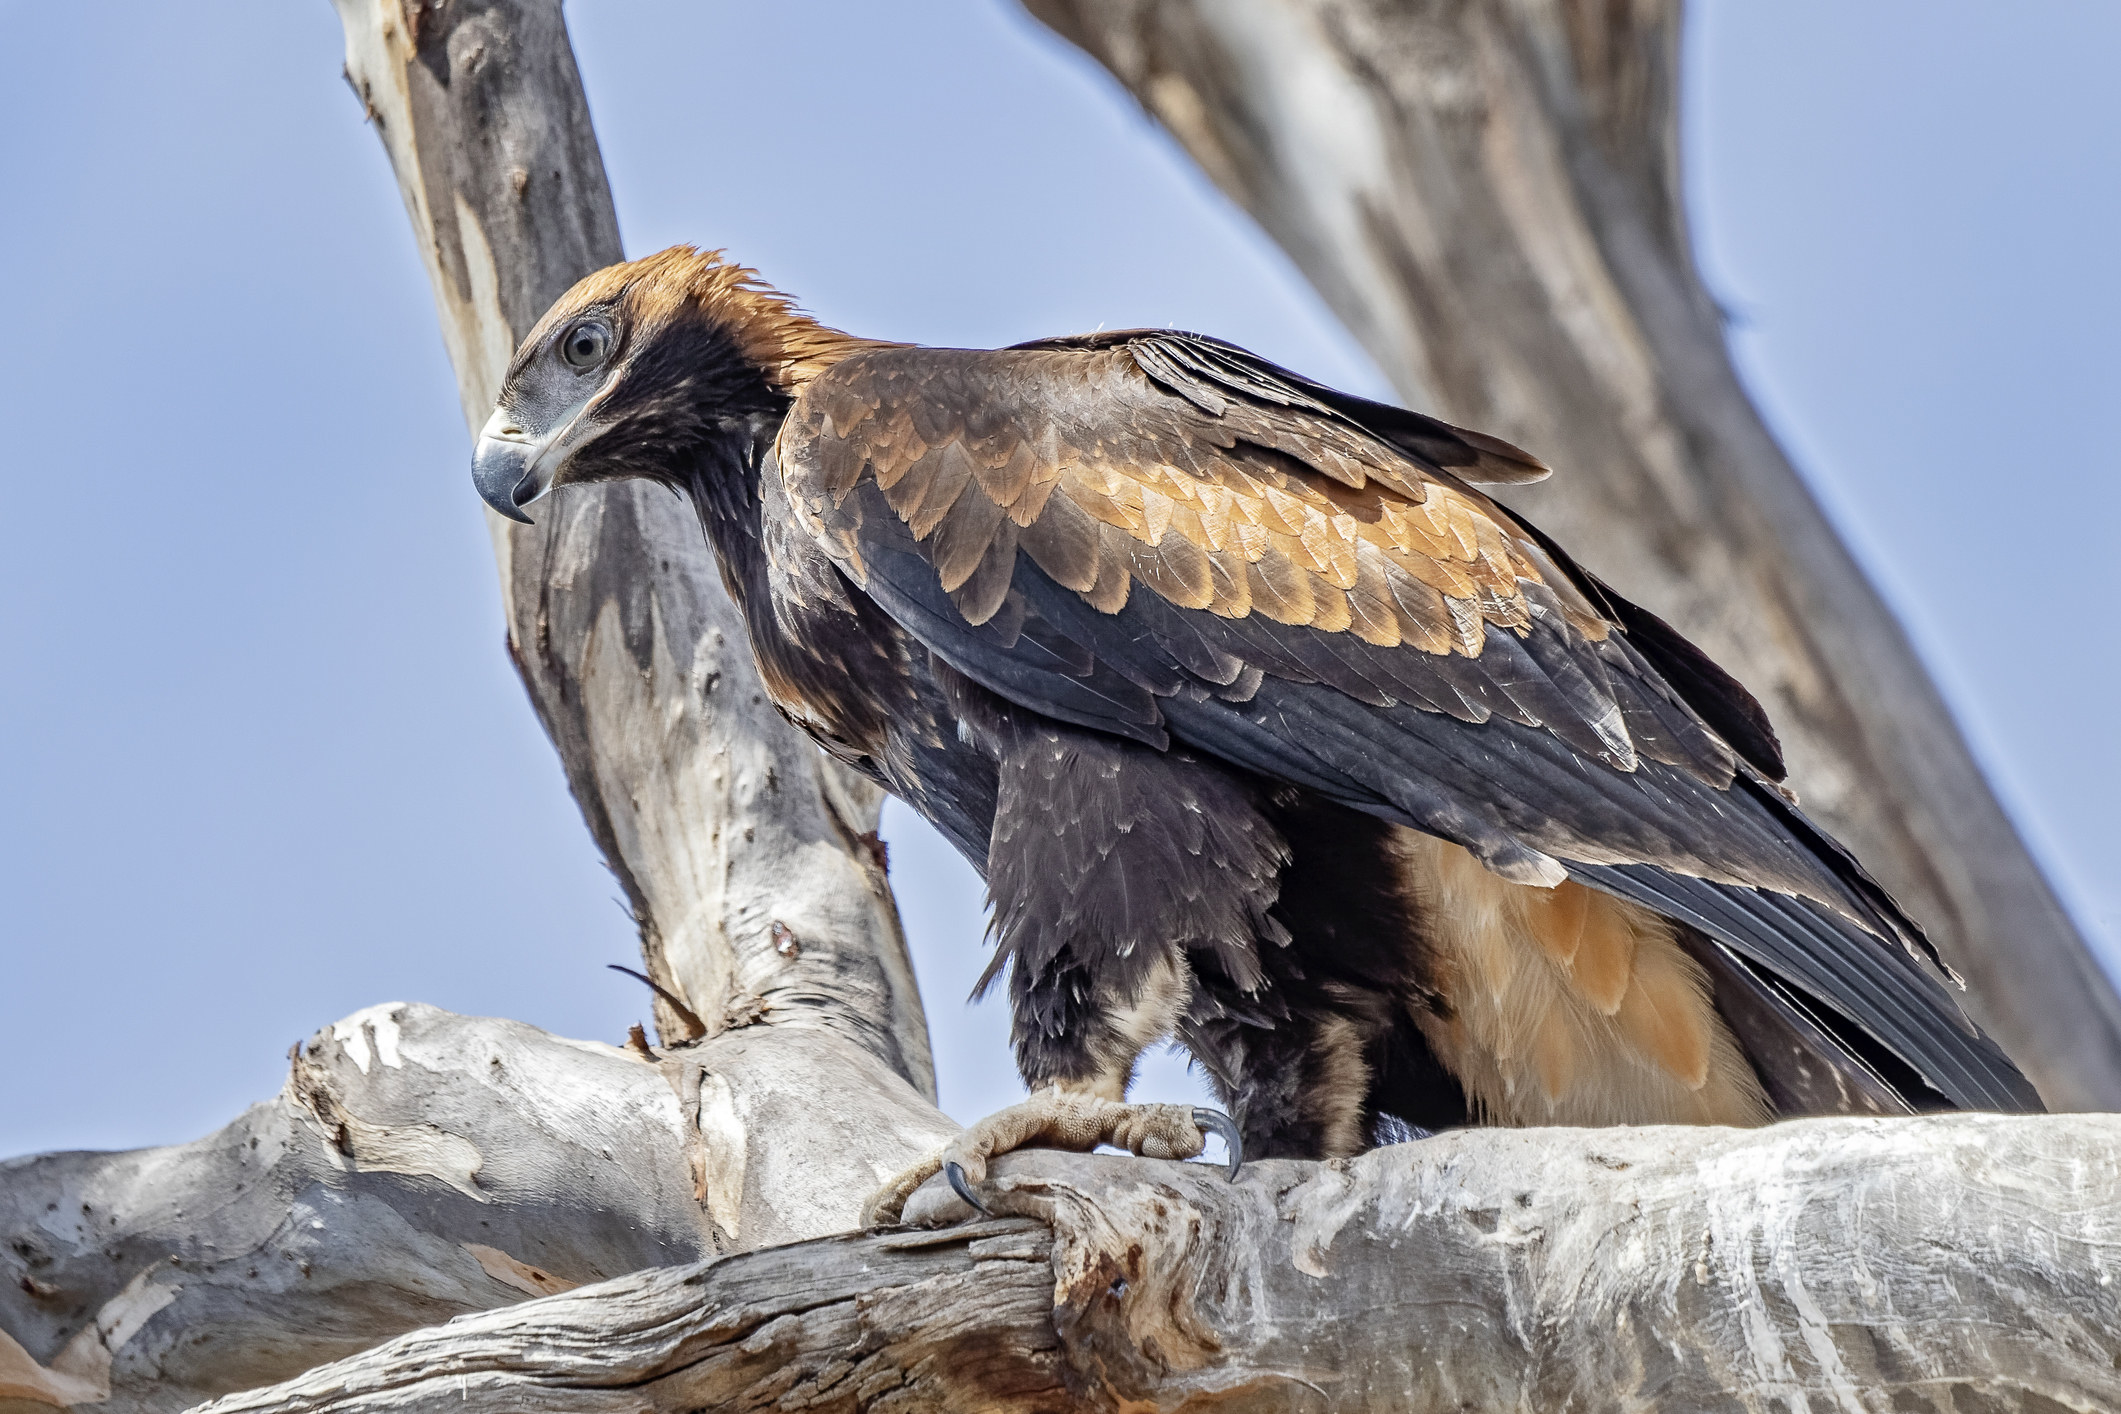 A female wedge-tailed eagle perched in a tree